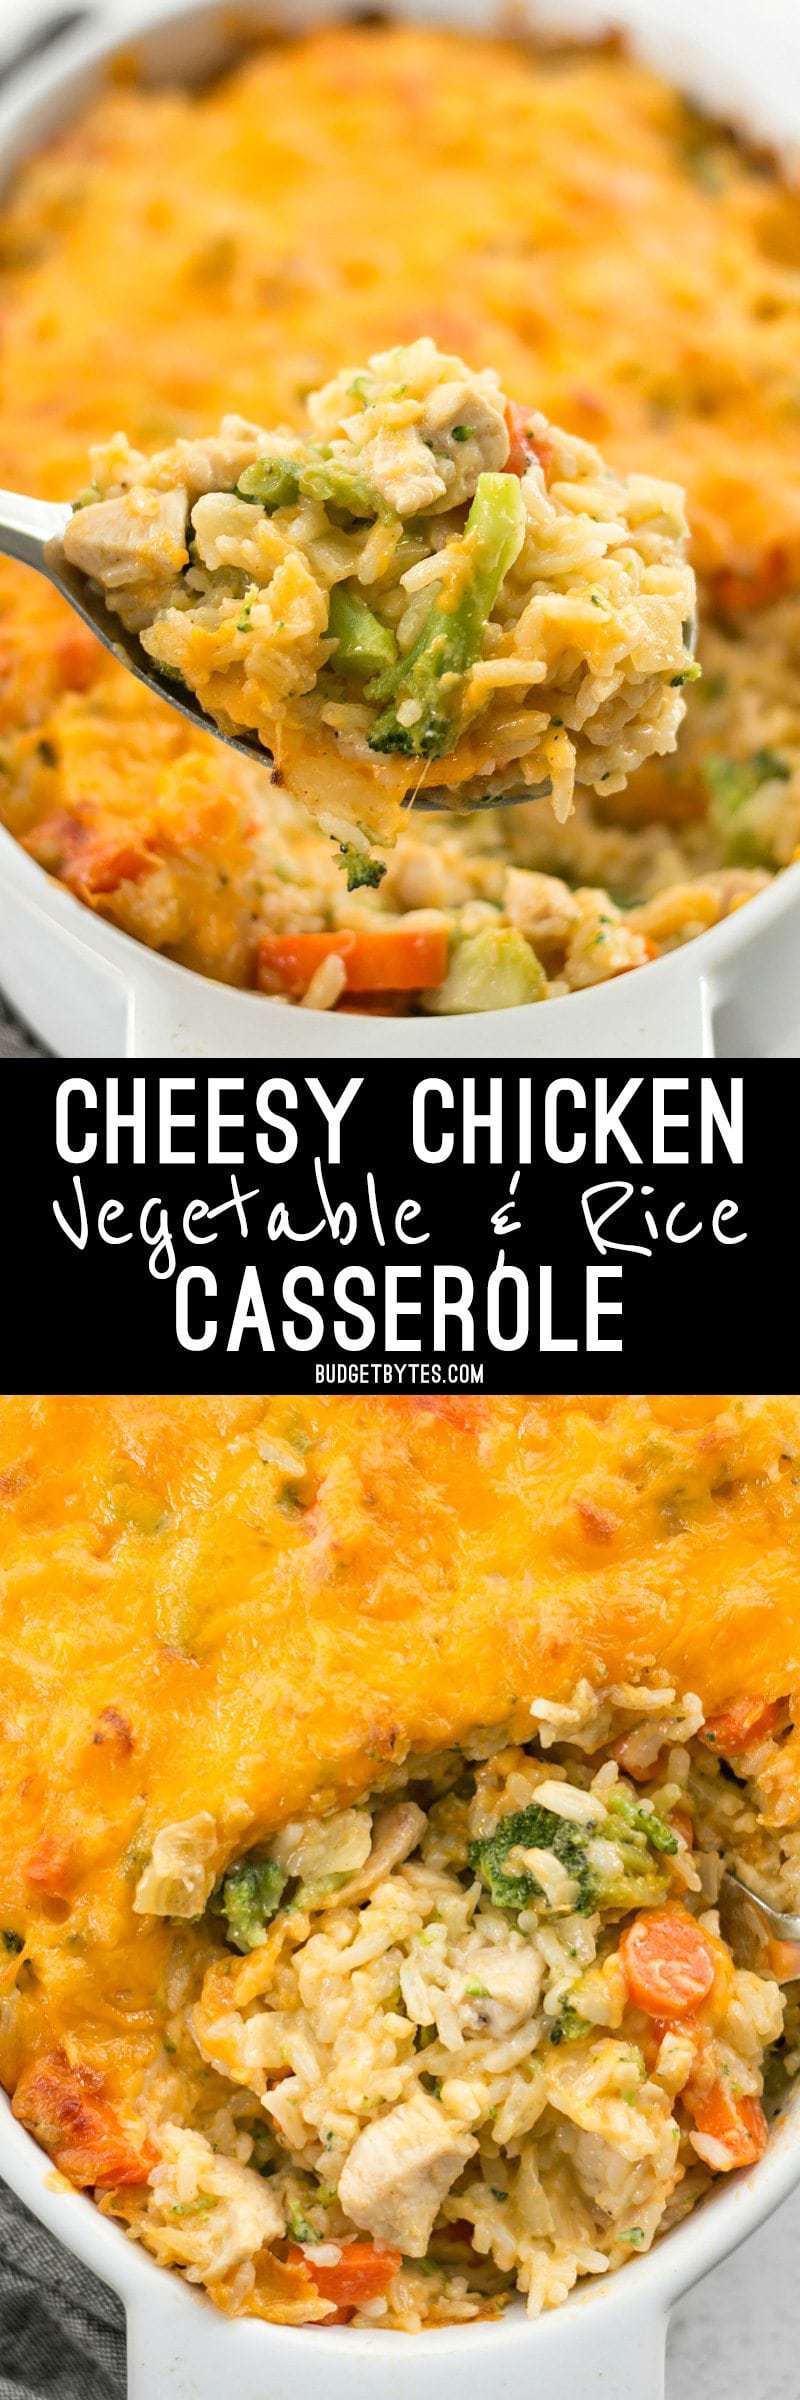 This Cheesy Chicken Vegetable and Rice Casserole is everything your comfort food dreams are made of. BudgetBytes.com